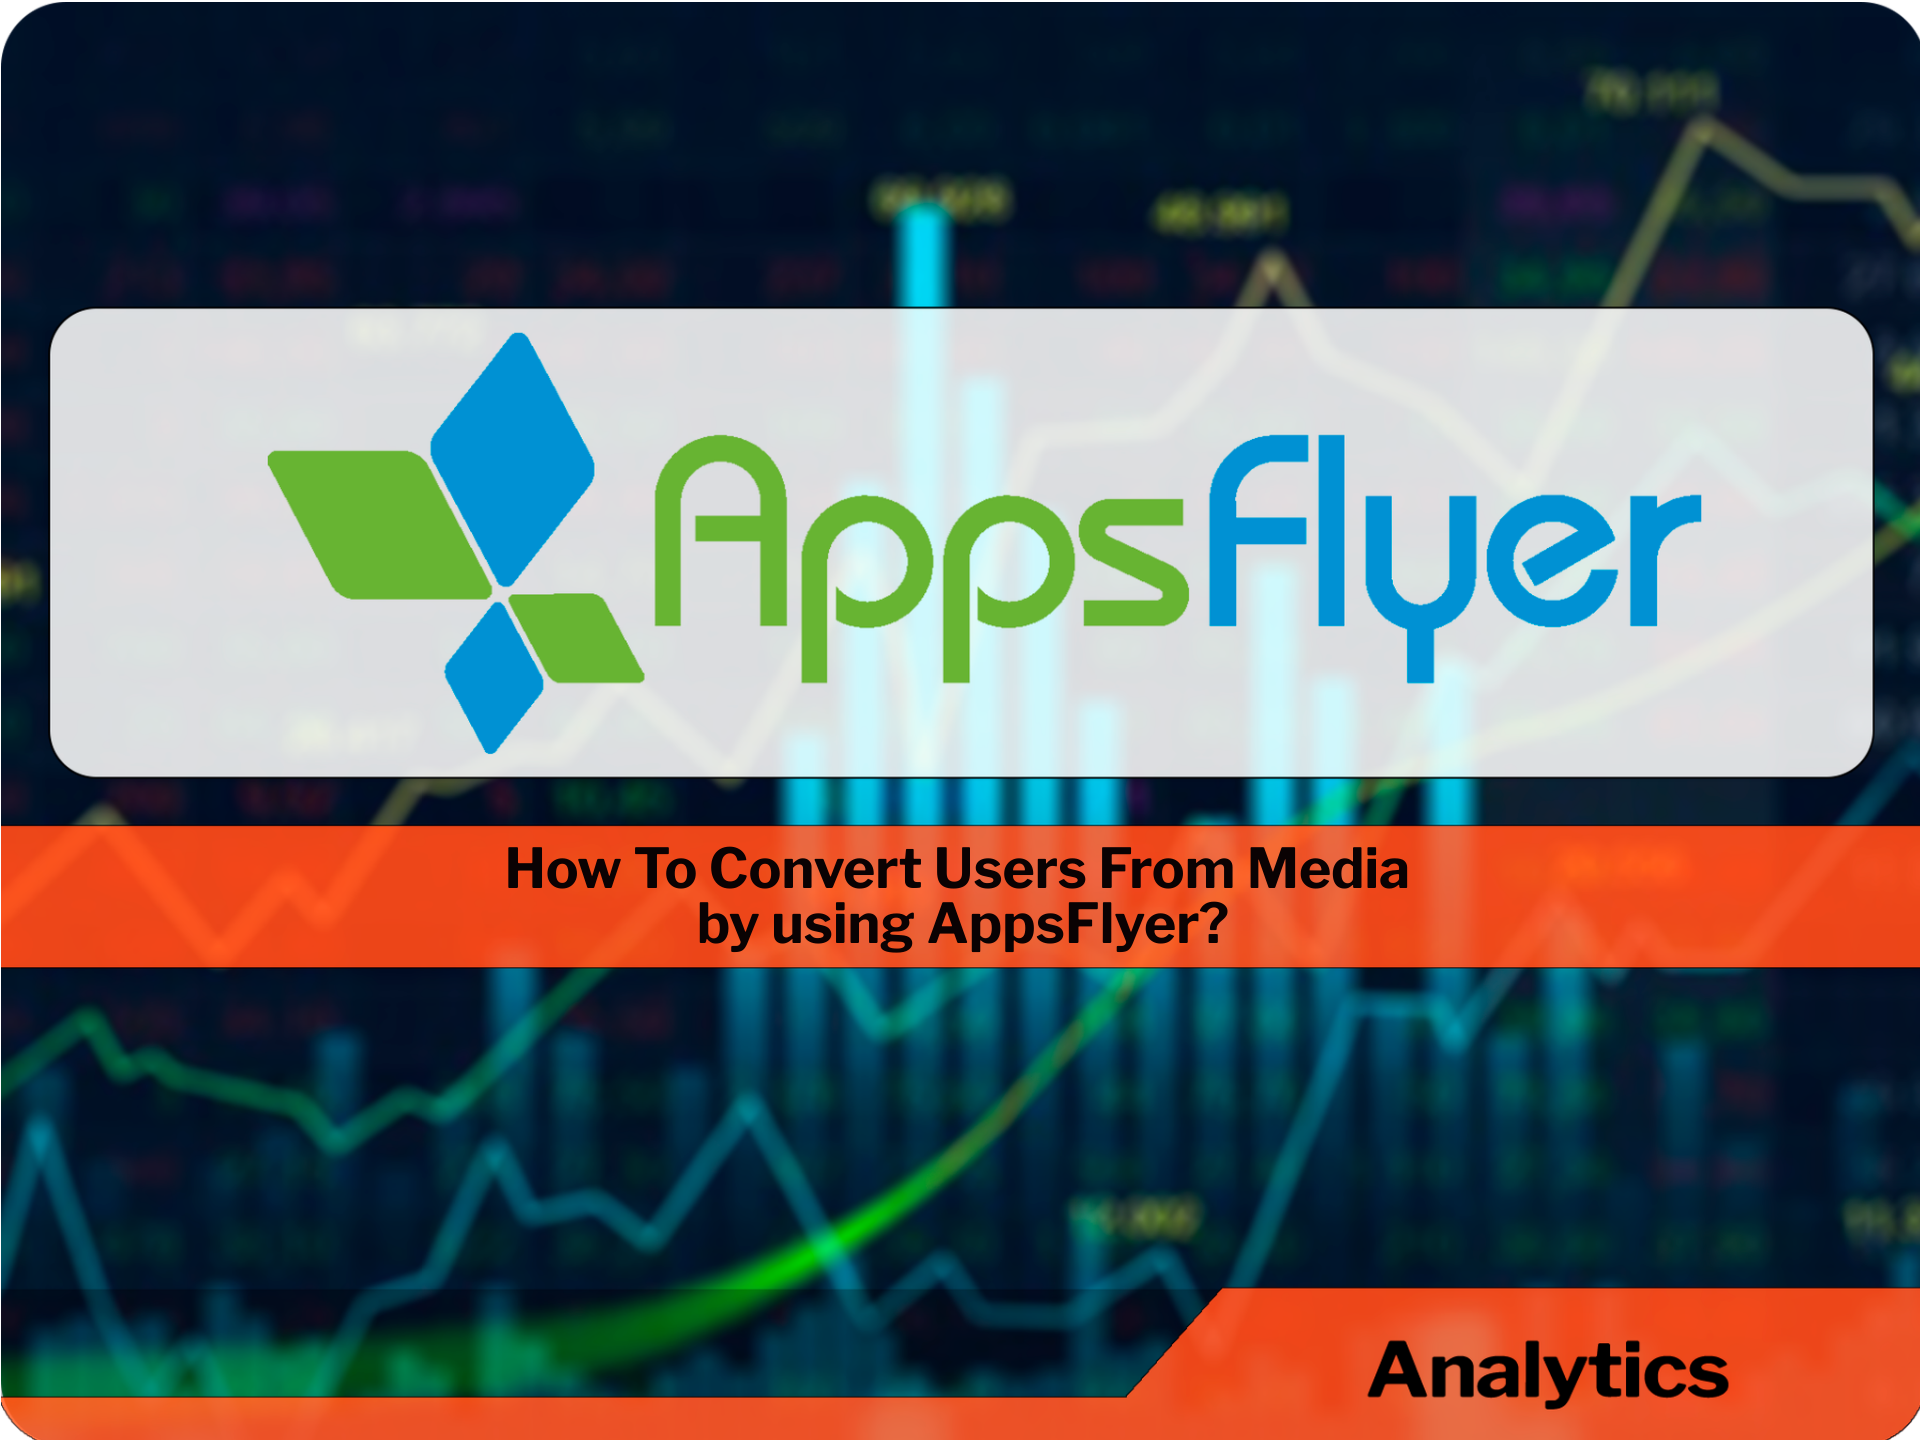 How To Convert Users From Media by using AppsFlyer?